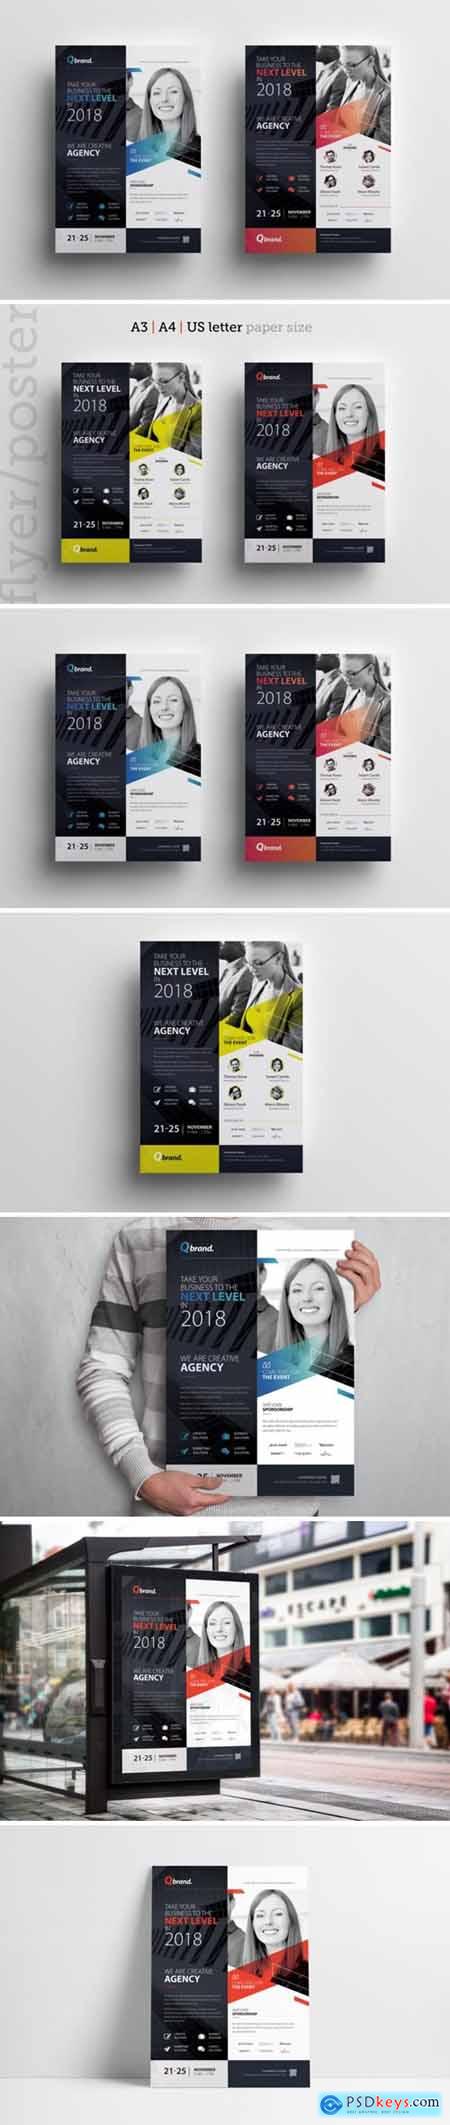 Business Event Flyer & Poster Template